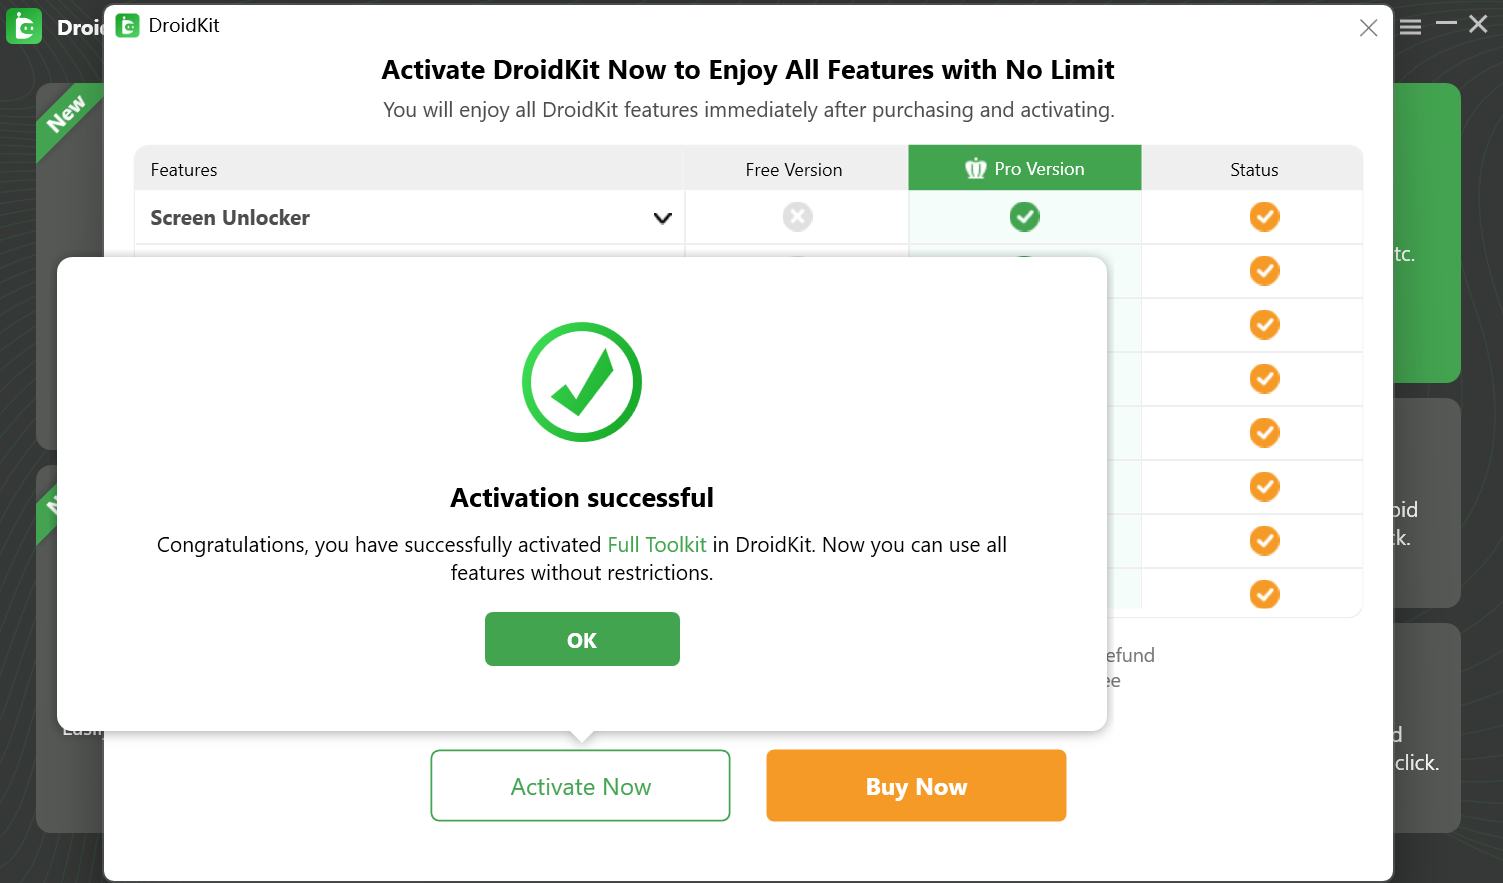 How to Activate DroidKit on Your Computer